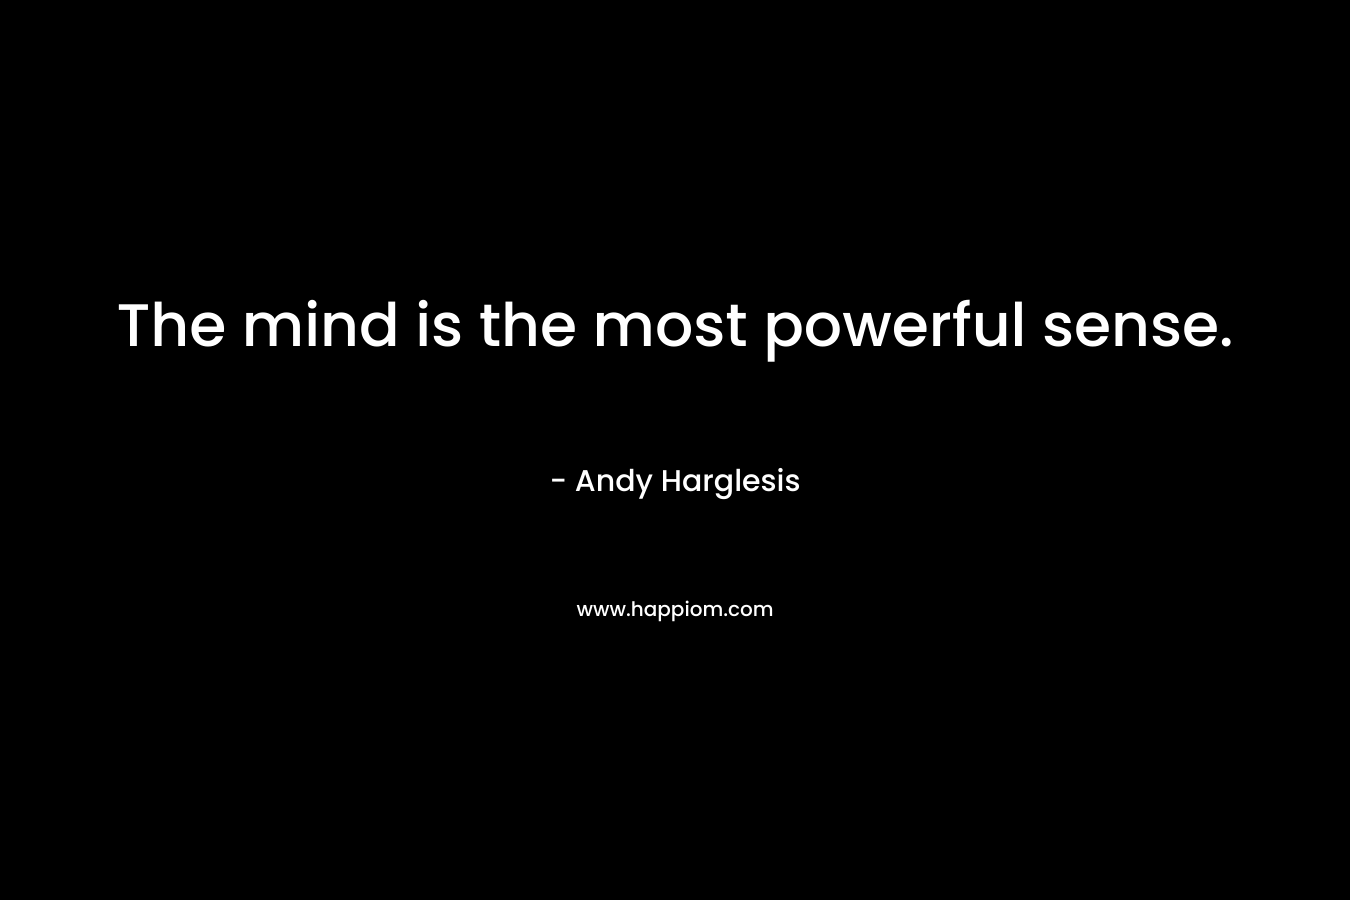 The mind is the most powerful sense.